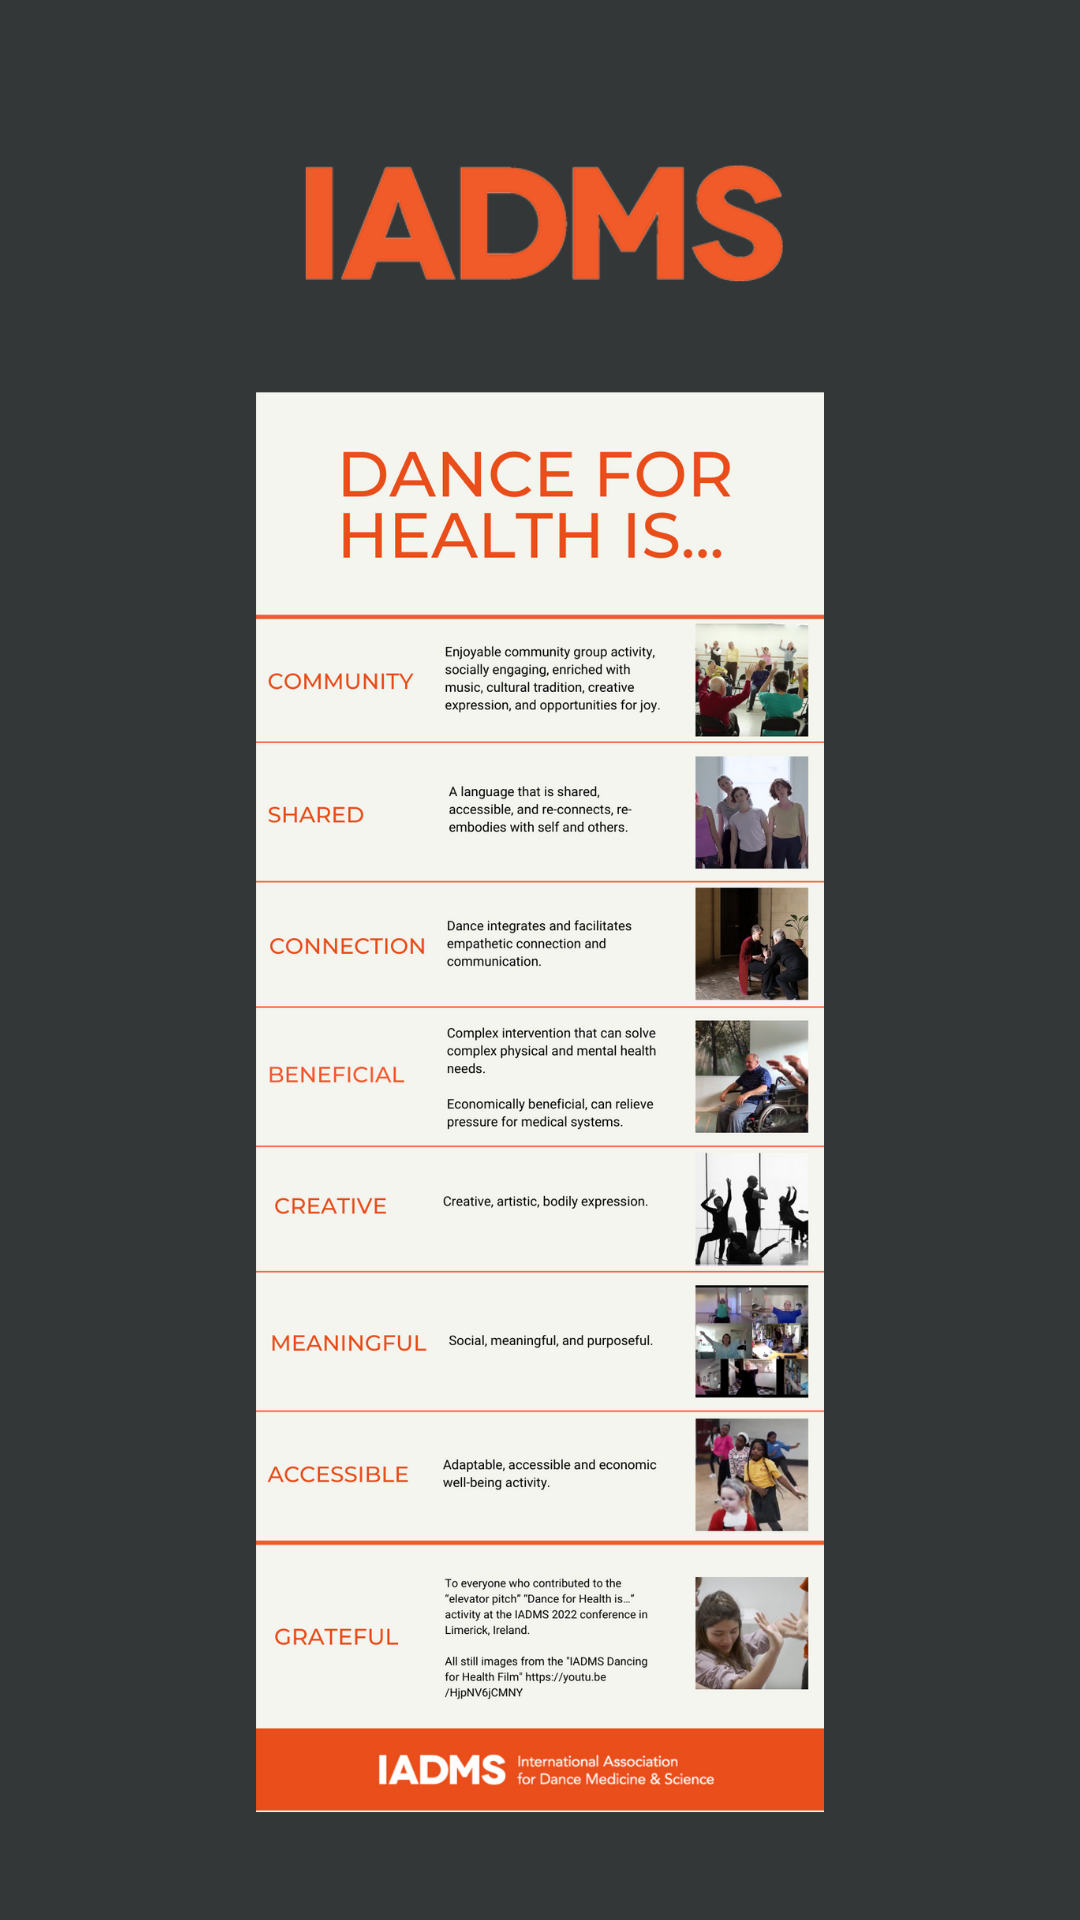 IADMS Infographic - Dance for Health Is...